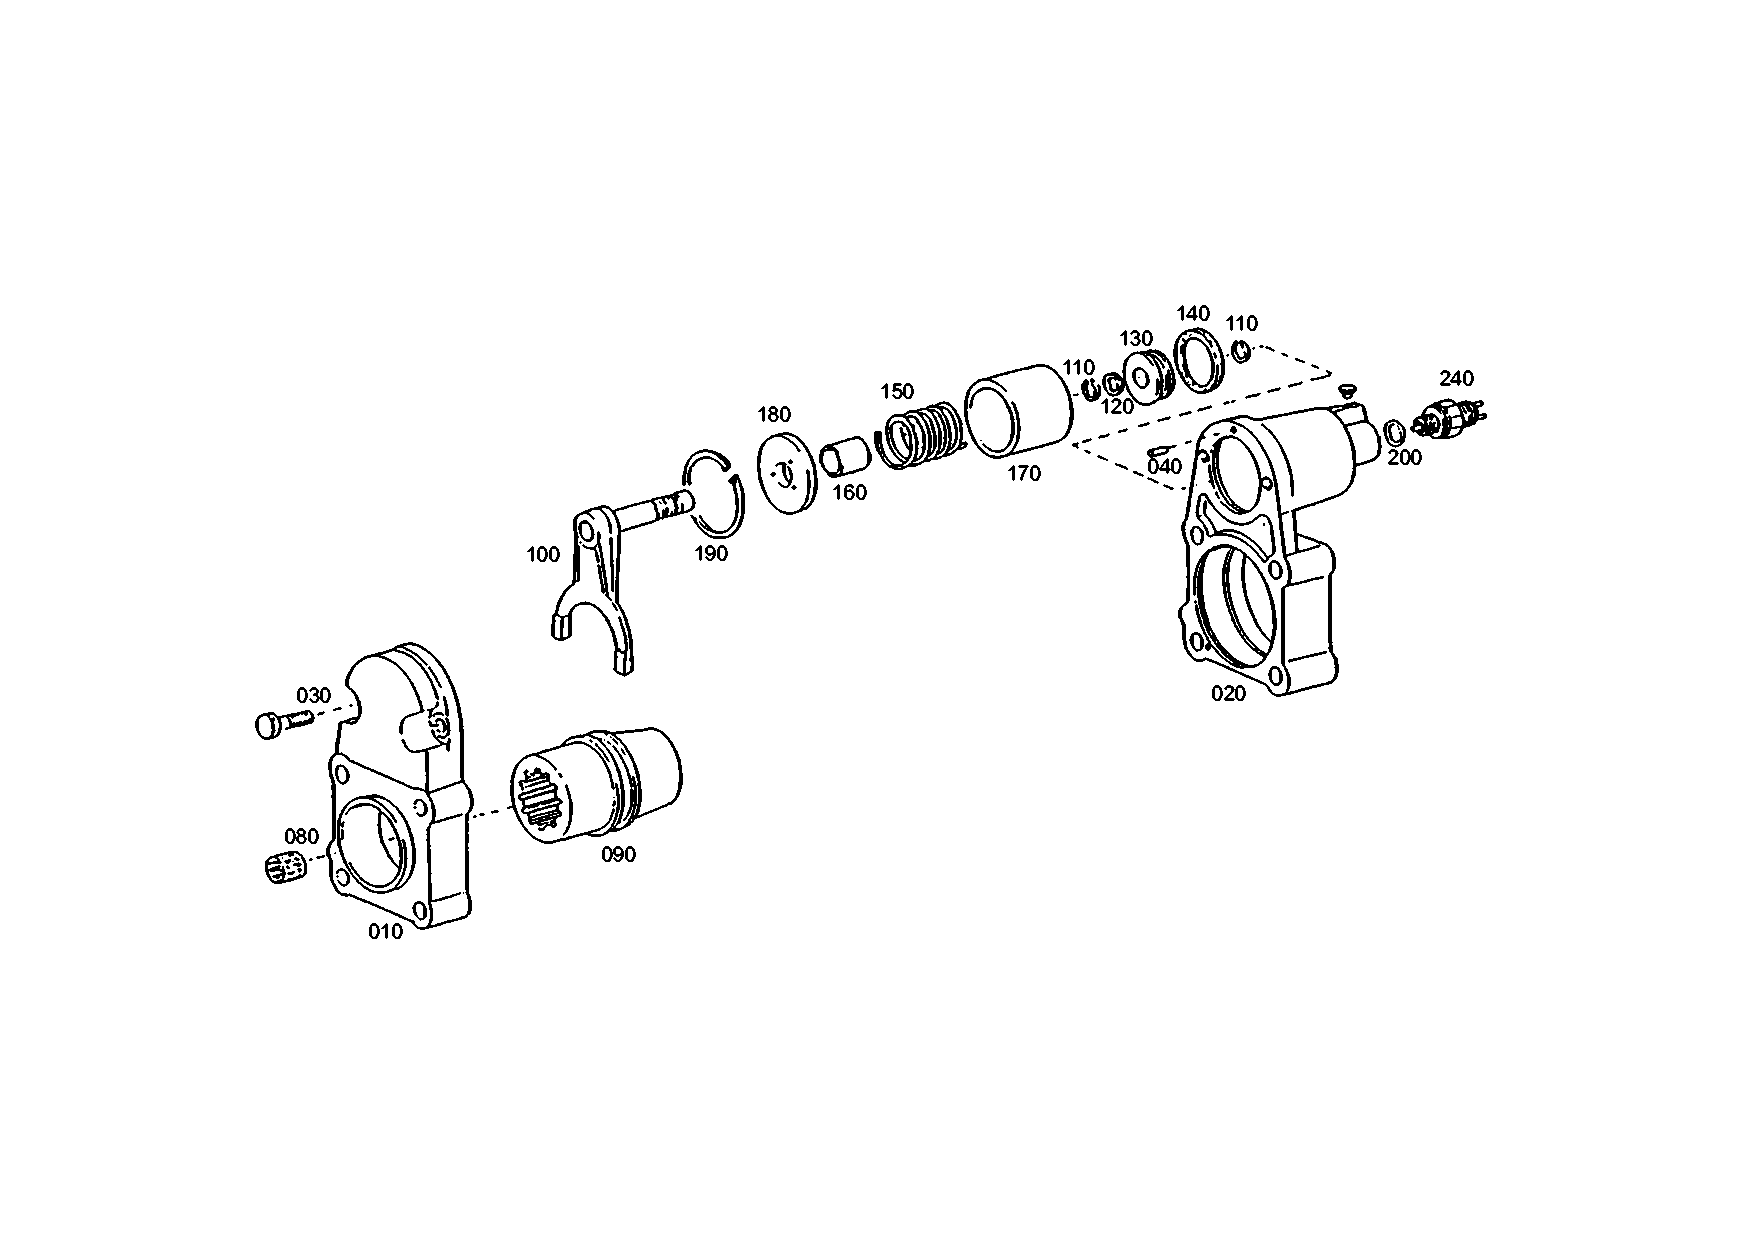 drawing for LUNA EQUIPOS INDUSTRIEALES, S.A. 199014250123 - WASHER (figure 3)